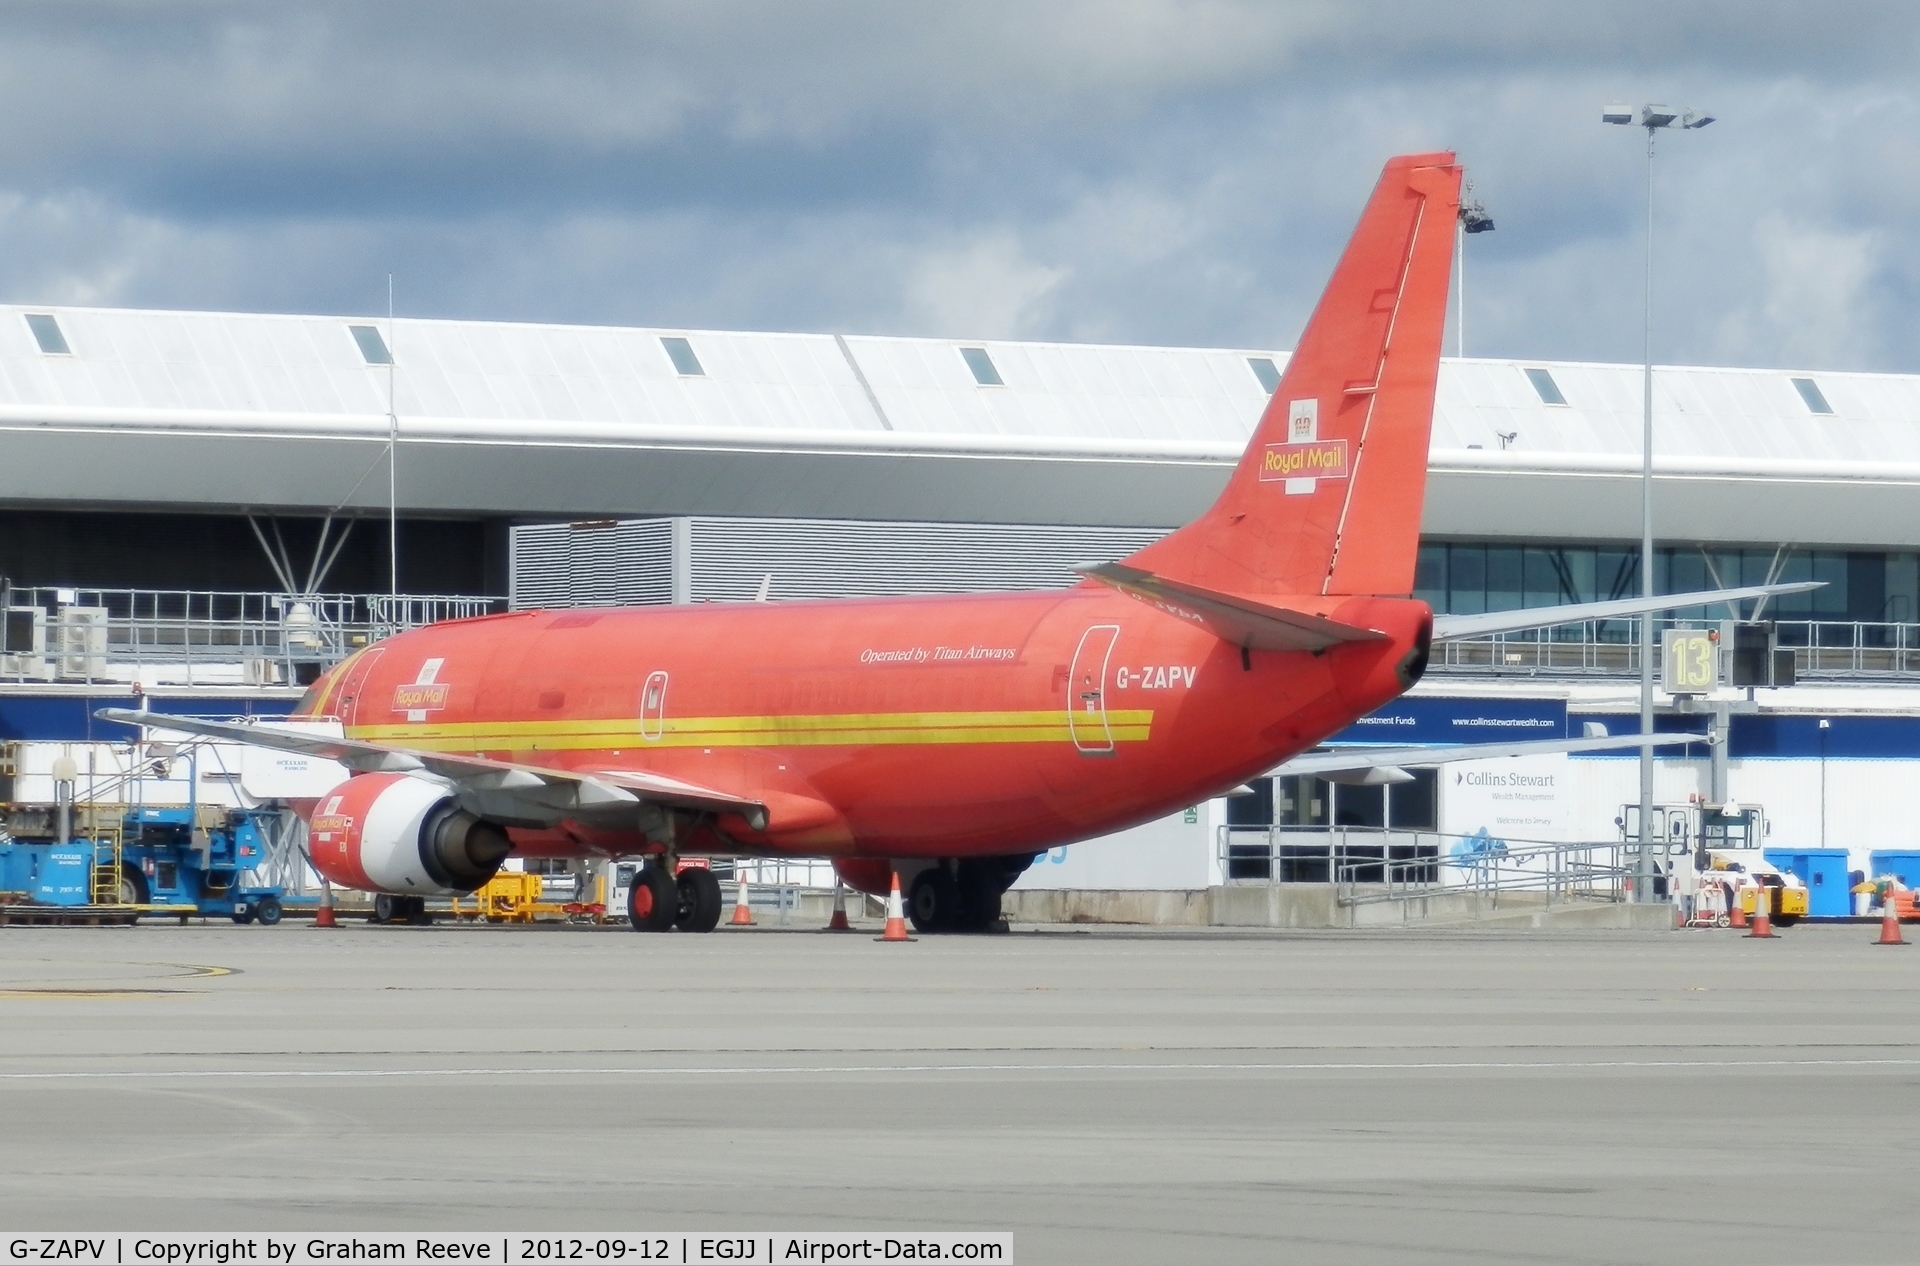 G-ZAPV, 1989 Boeing 737-3Y0 C/N 24546, Parked at Jersey.